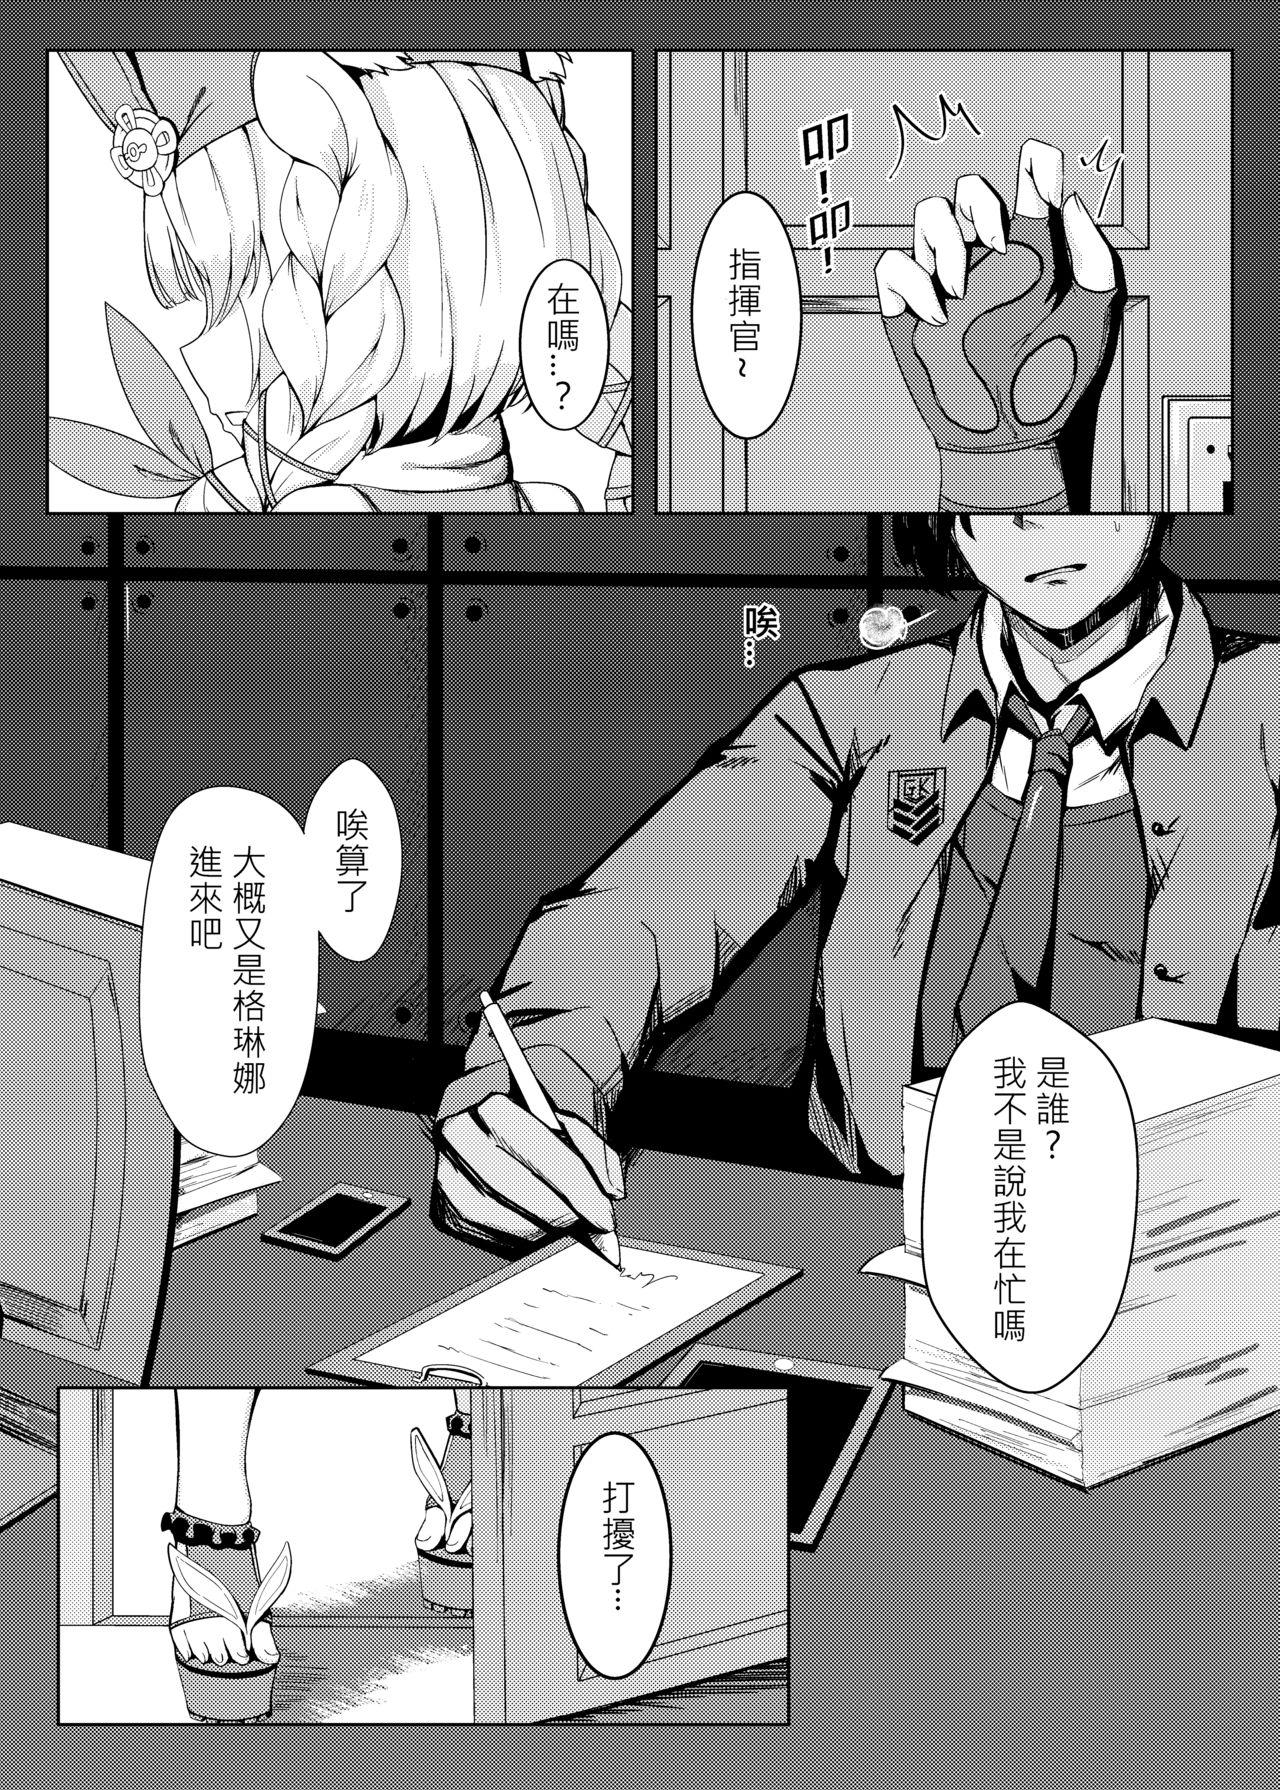 Load Rest with SR-3MP - Girls frontline Fudendo - Page 3